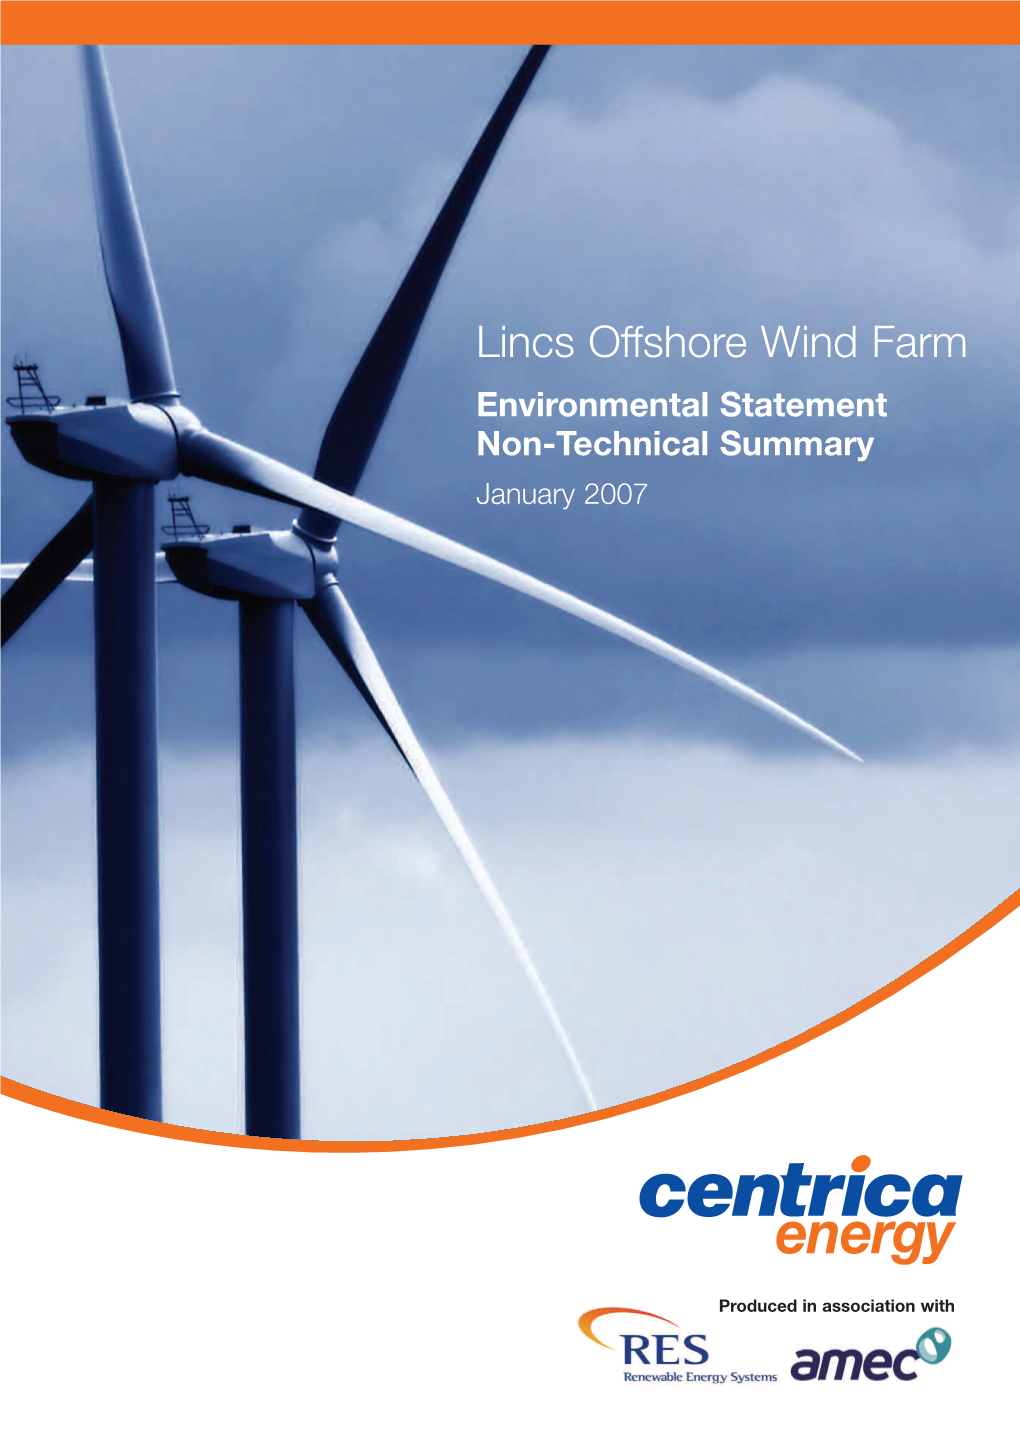 Lincs Offshore Wind Farm Environmental Statement Non-Technical Summary January 2007